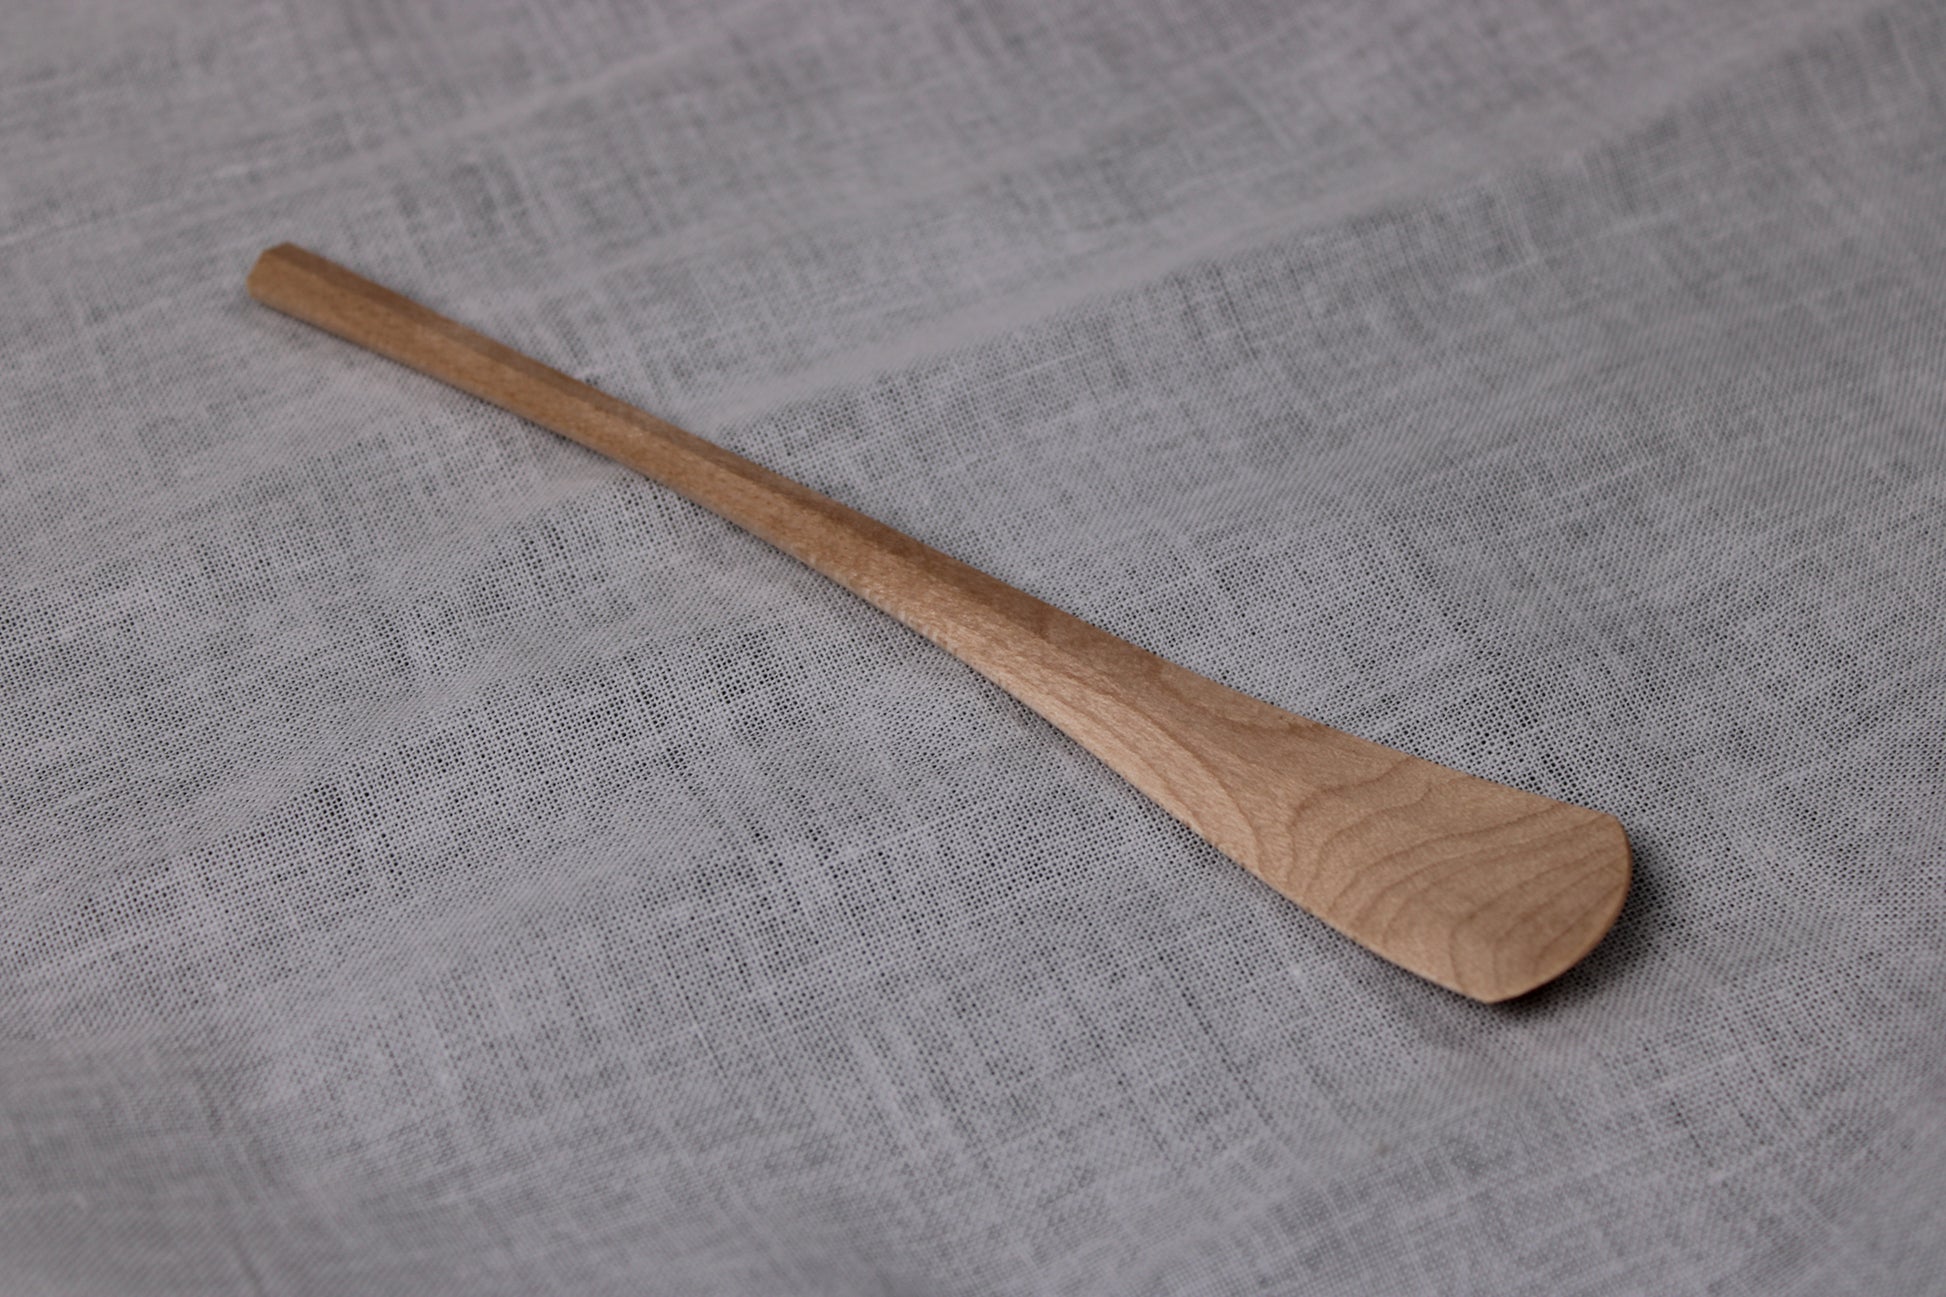 okubo house handmade artisan maple wood spoon made without sanding or filing layed flat with white background